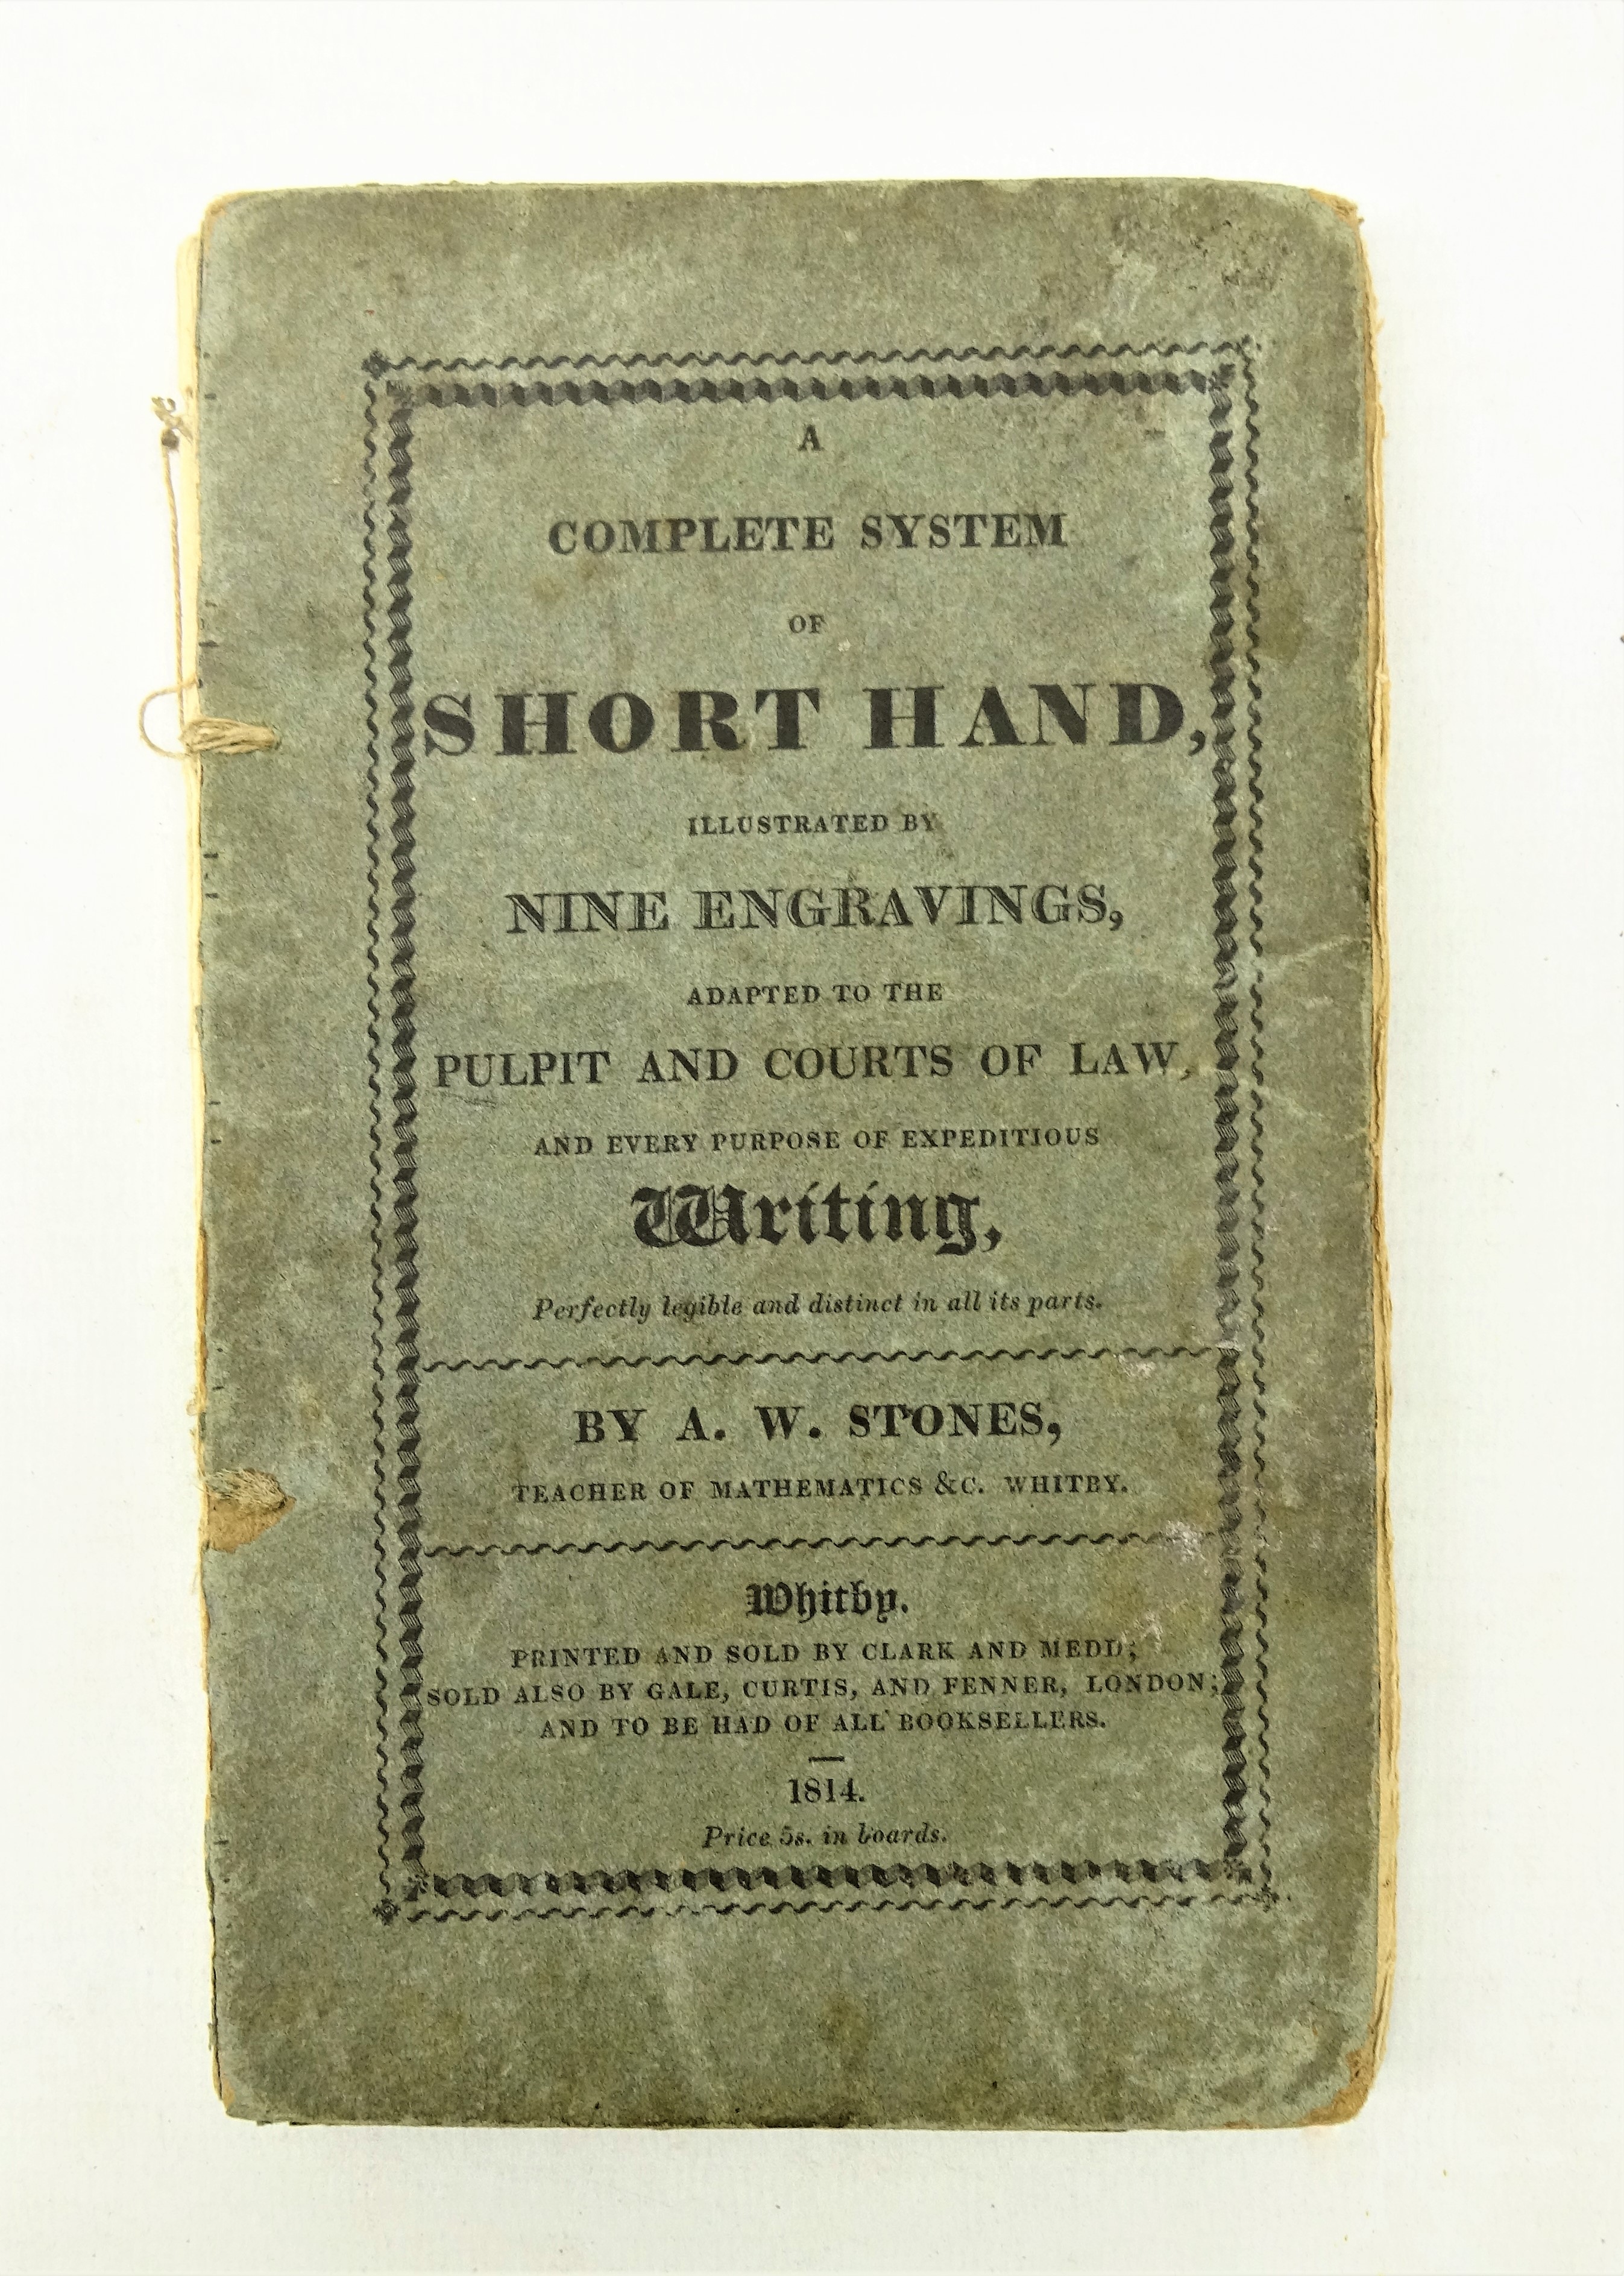 'A Complete System of Shorthand with Nine Engravings' by A W Stones teacher of Mathematics, pub.